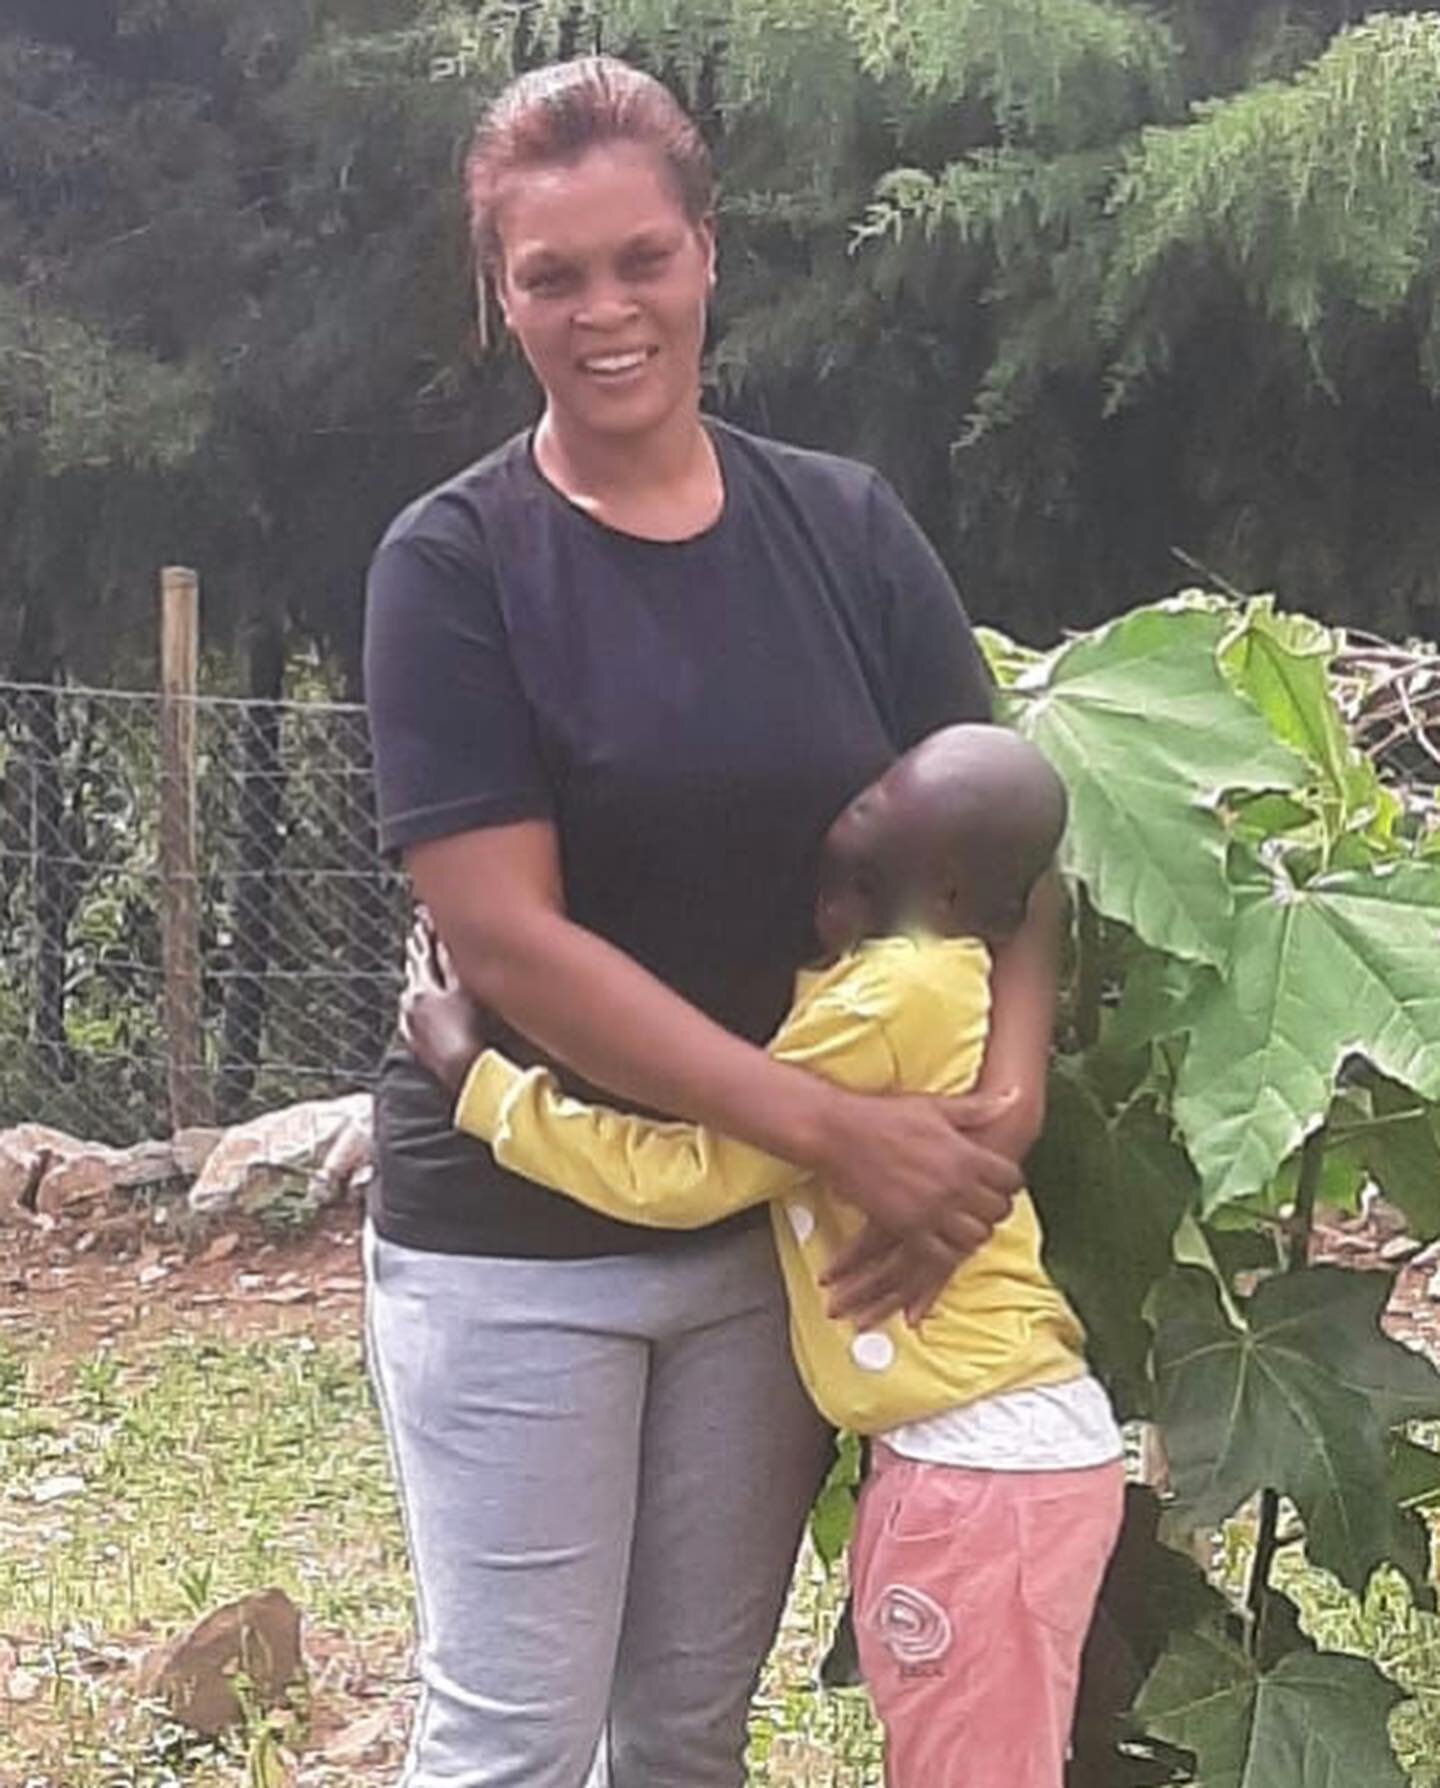 Hello and Merry Christmas from our Girls Rescue Center in Kenya! Here are a few photos of our &ldquo;home mother&rdquo;, Caro, with one of the girls who came into our care last year. This child was orphaned and highly malnourished when she came to us